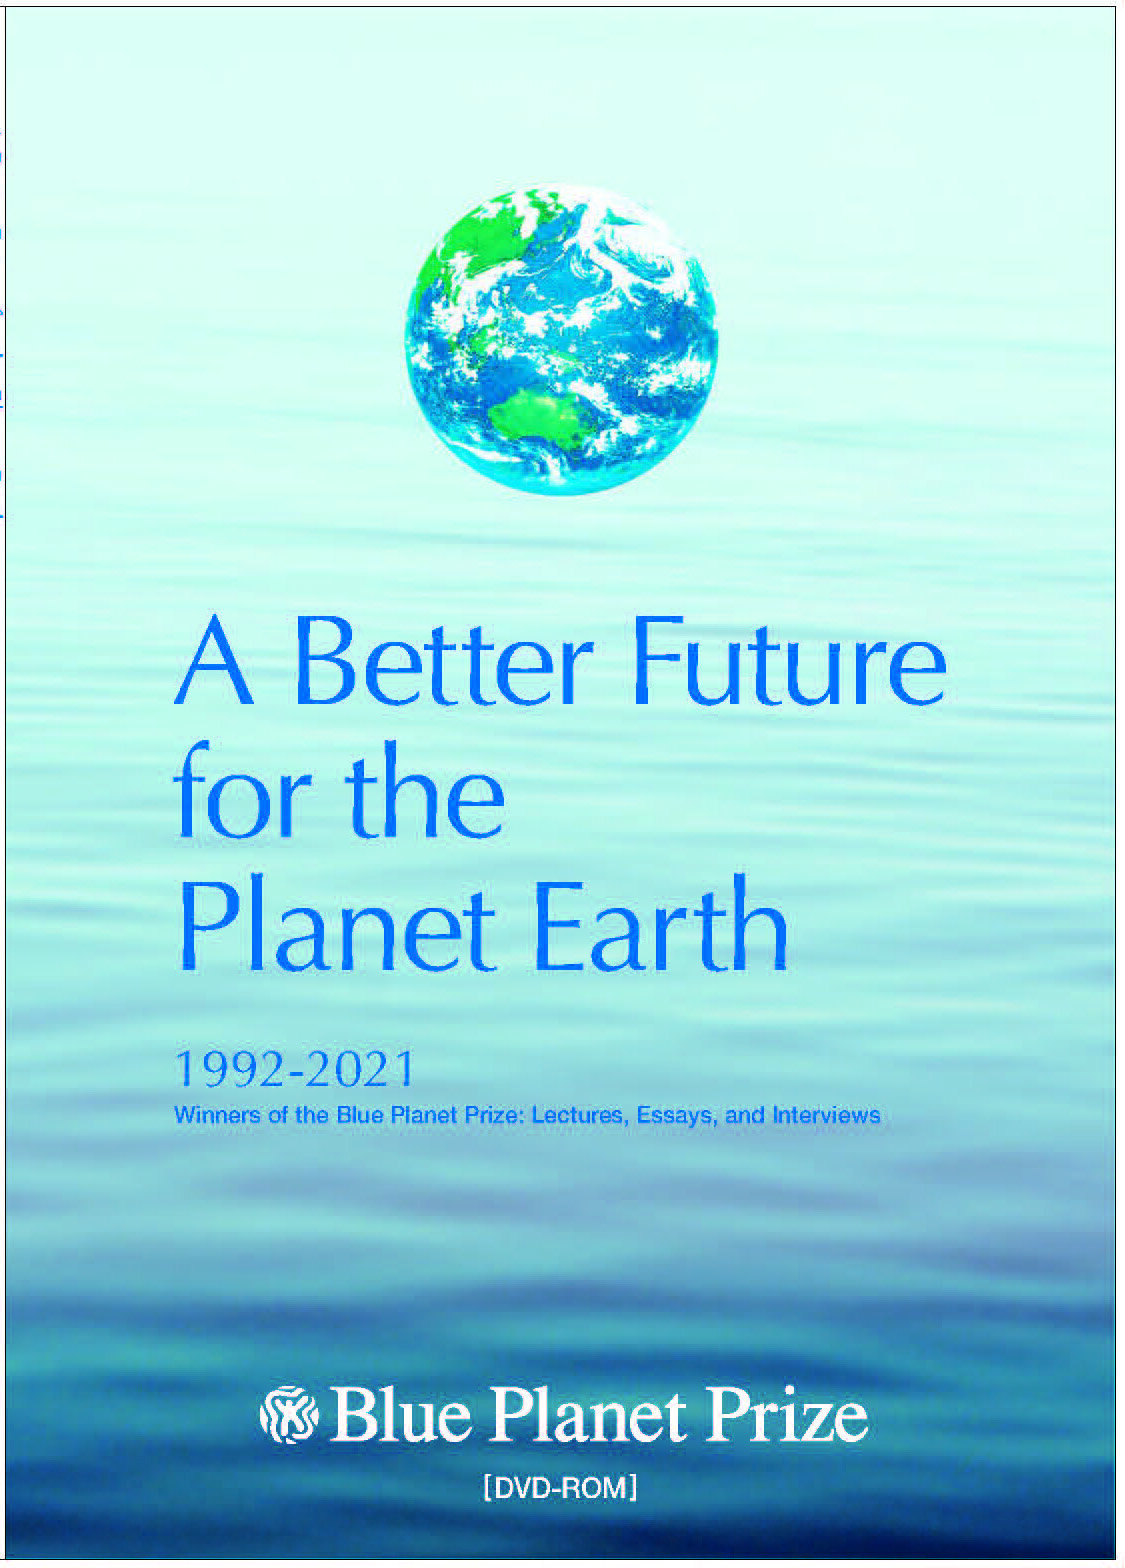 A Better Future for the Planet Earth